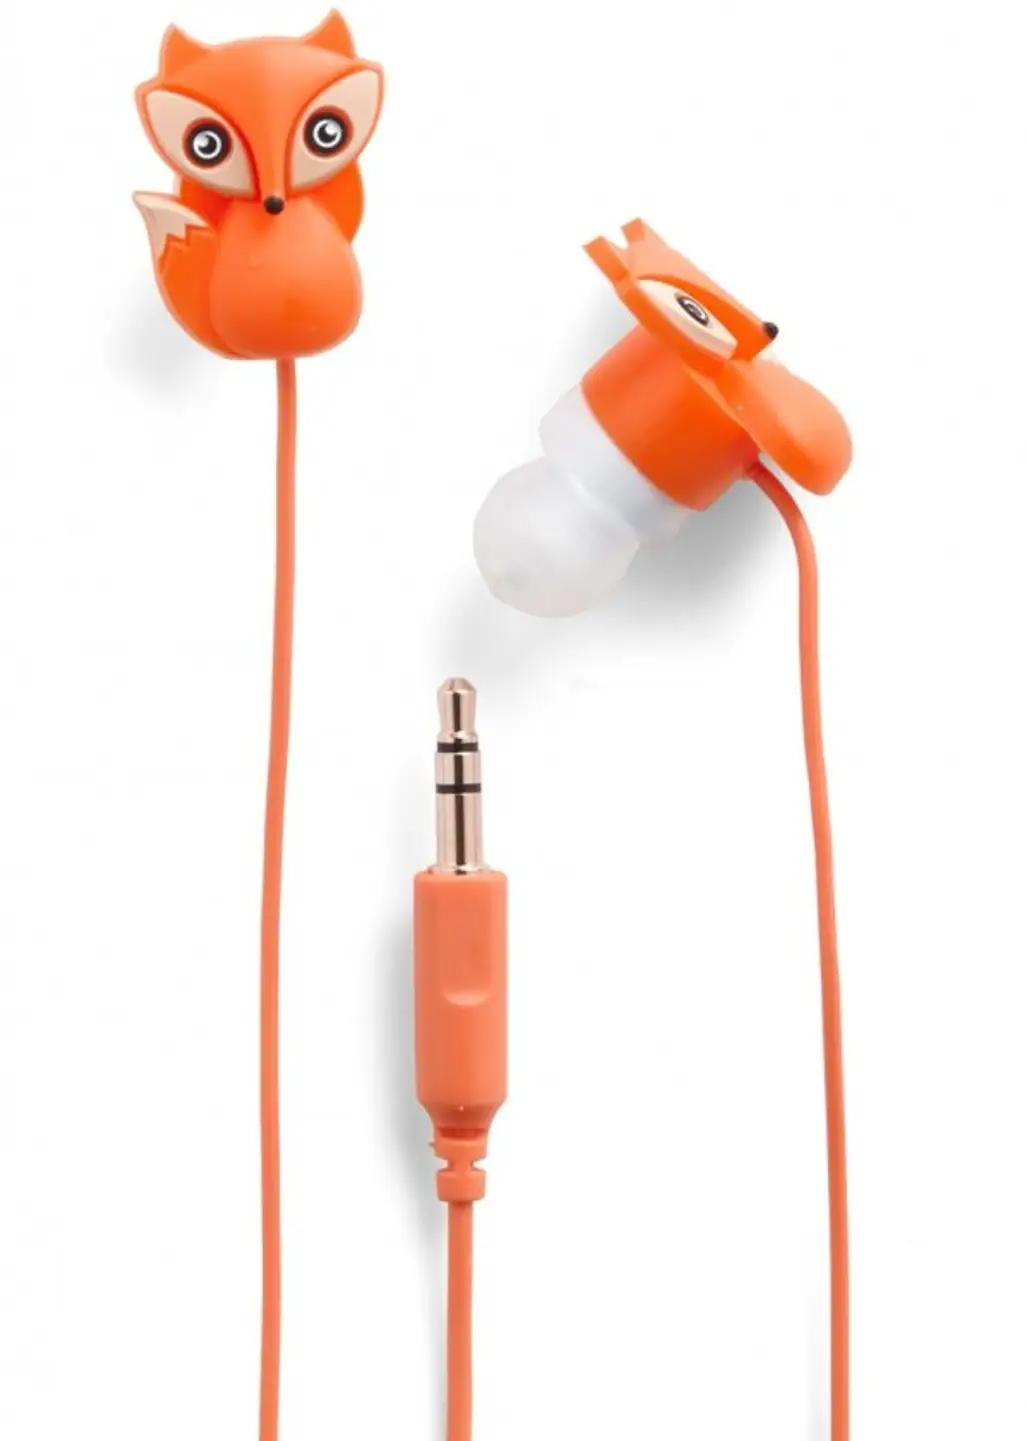 The Fox and the Sound Earbuds